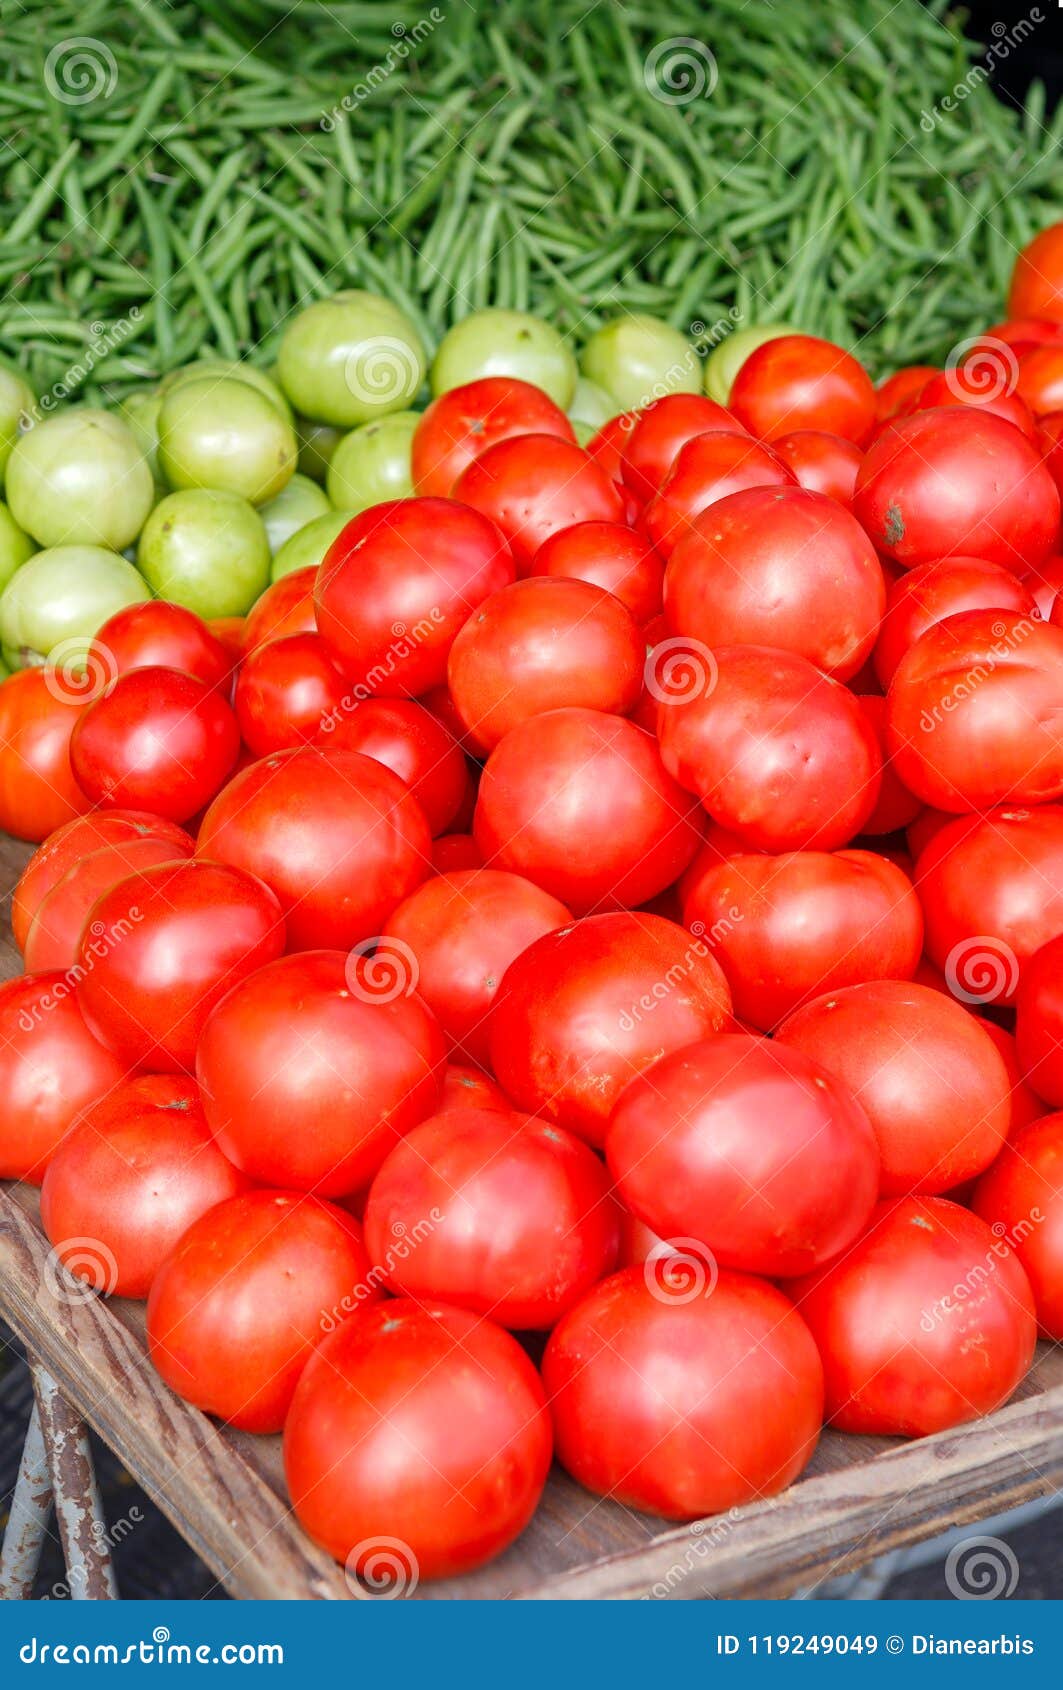 Tomatoes and String Beans at a Lcoal Market Stock Image - Image of ...